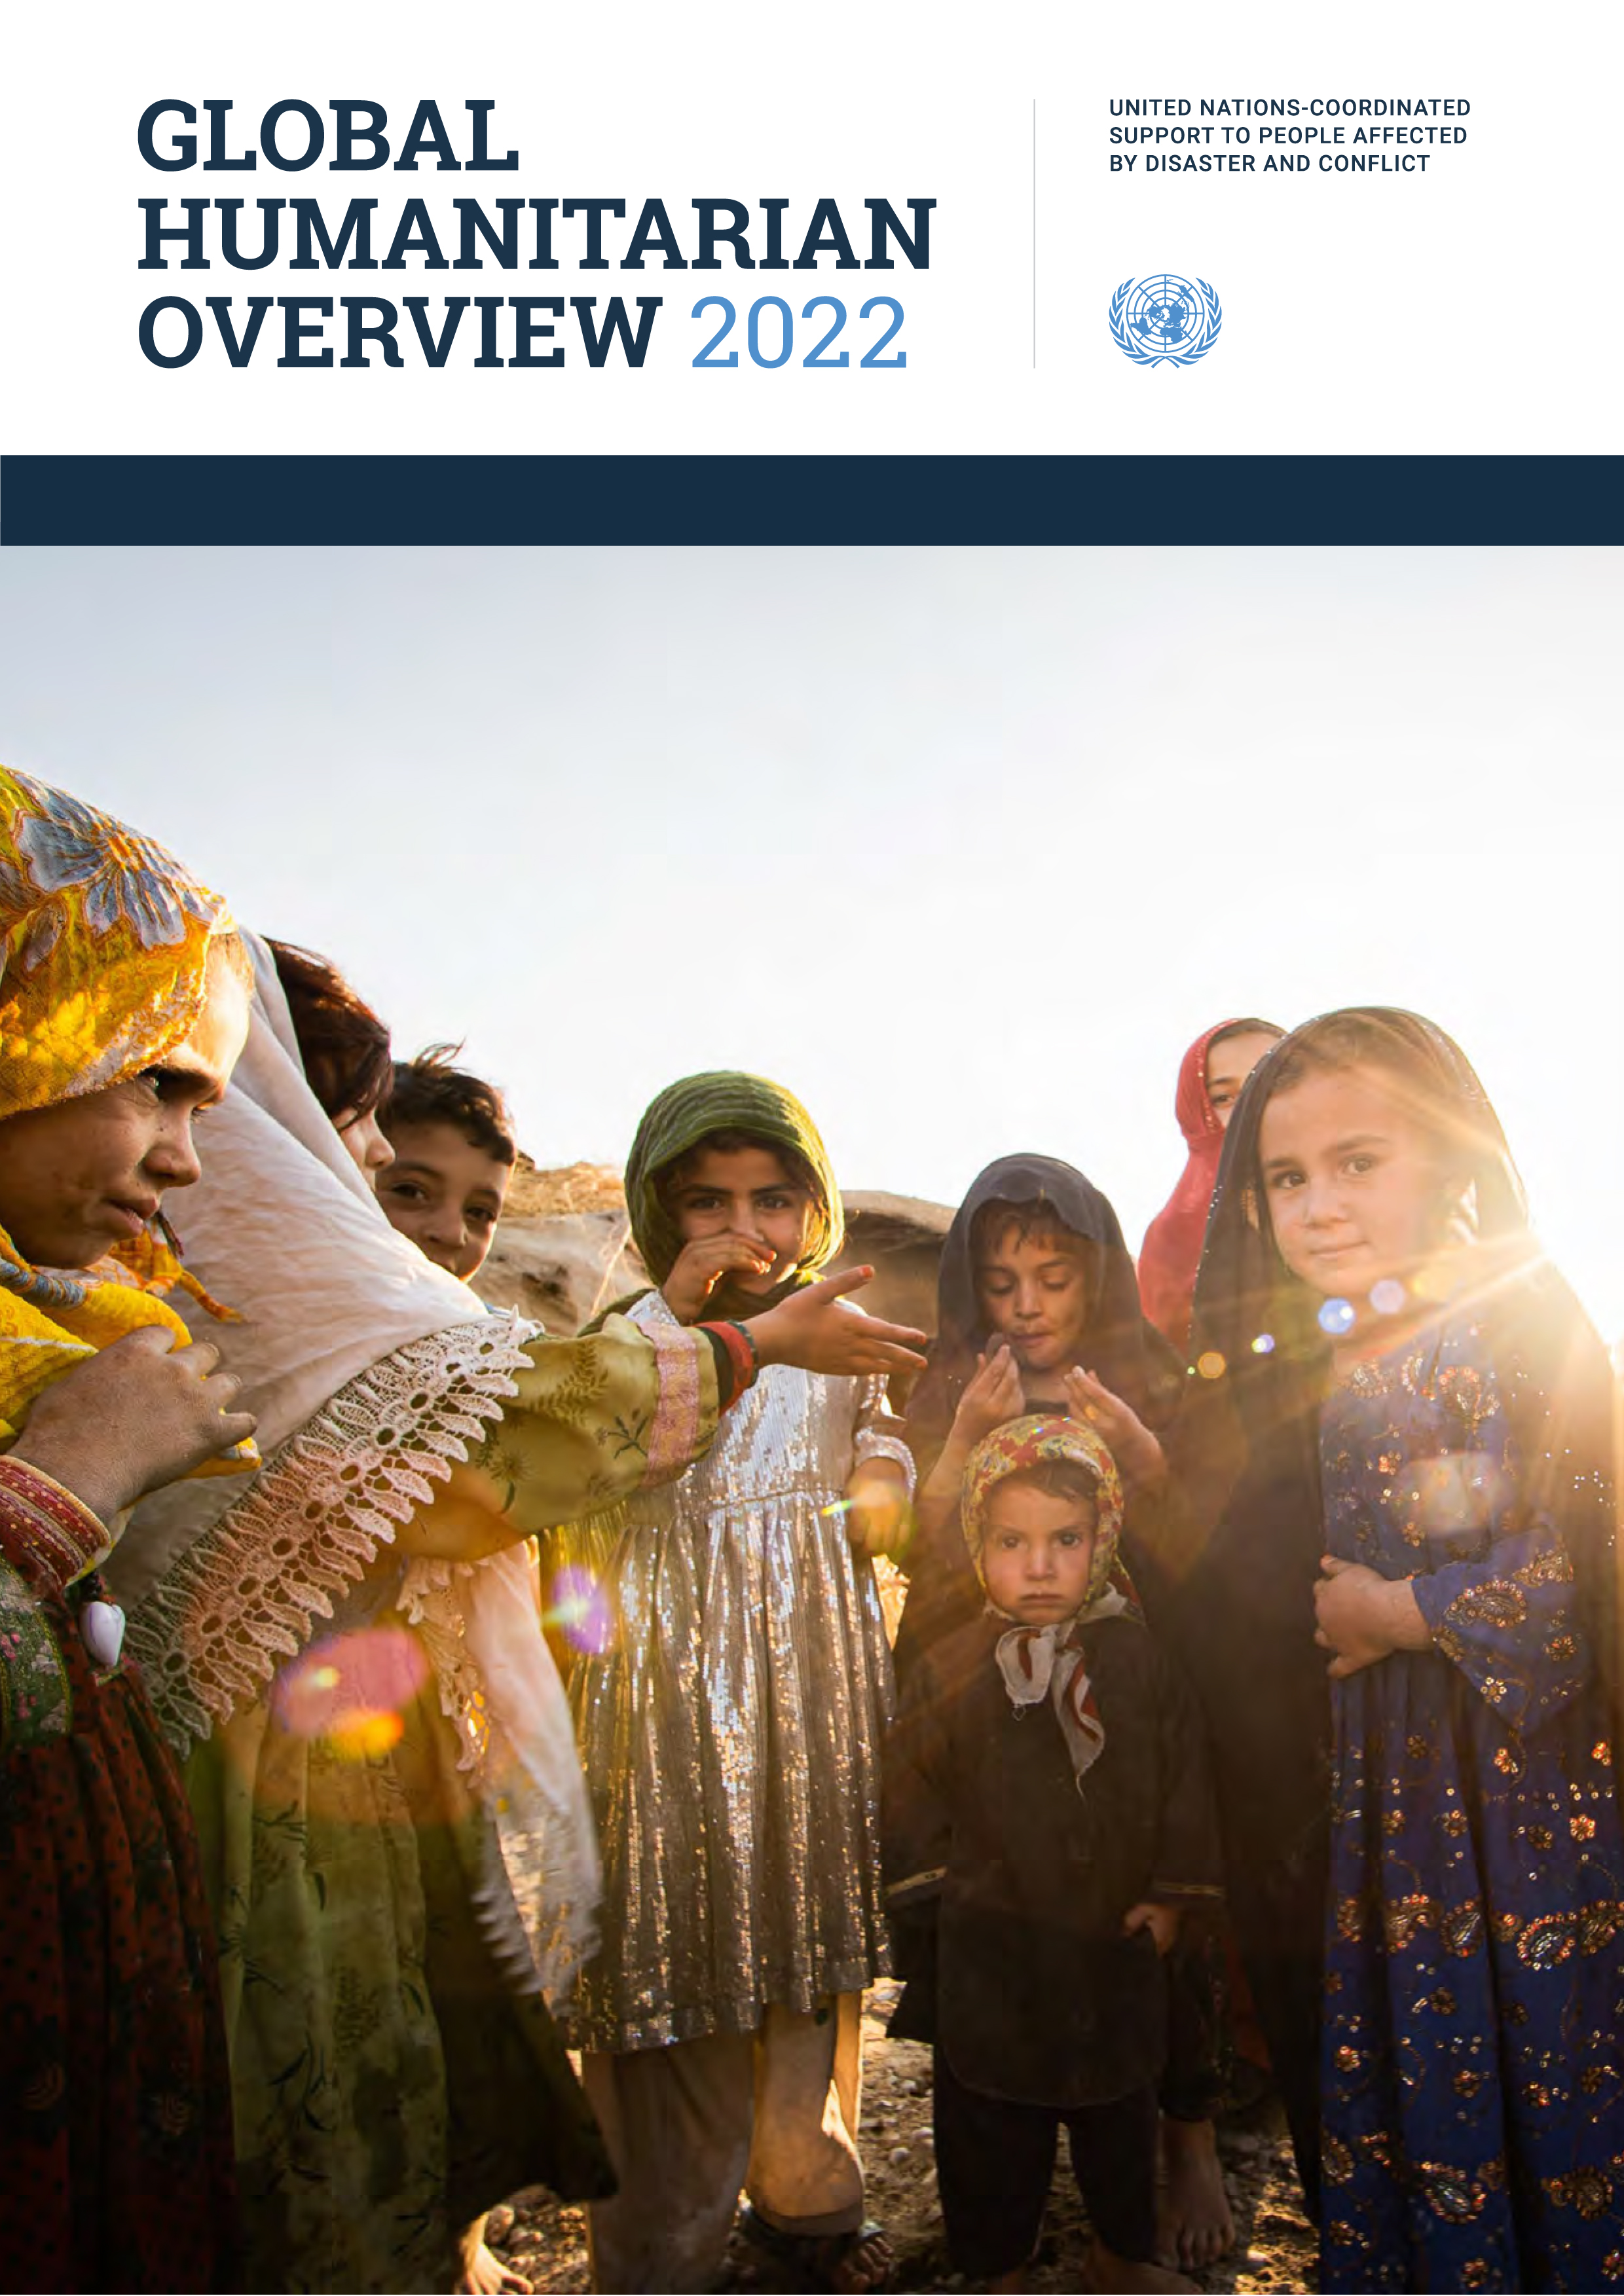 image of Global Humanitarian Overview 2022